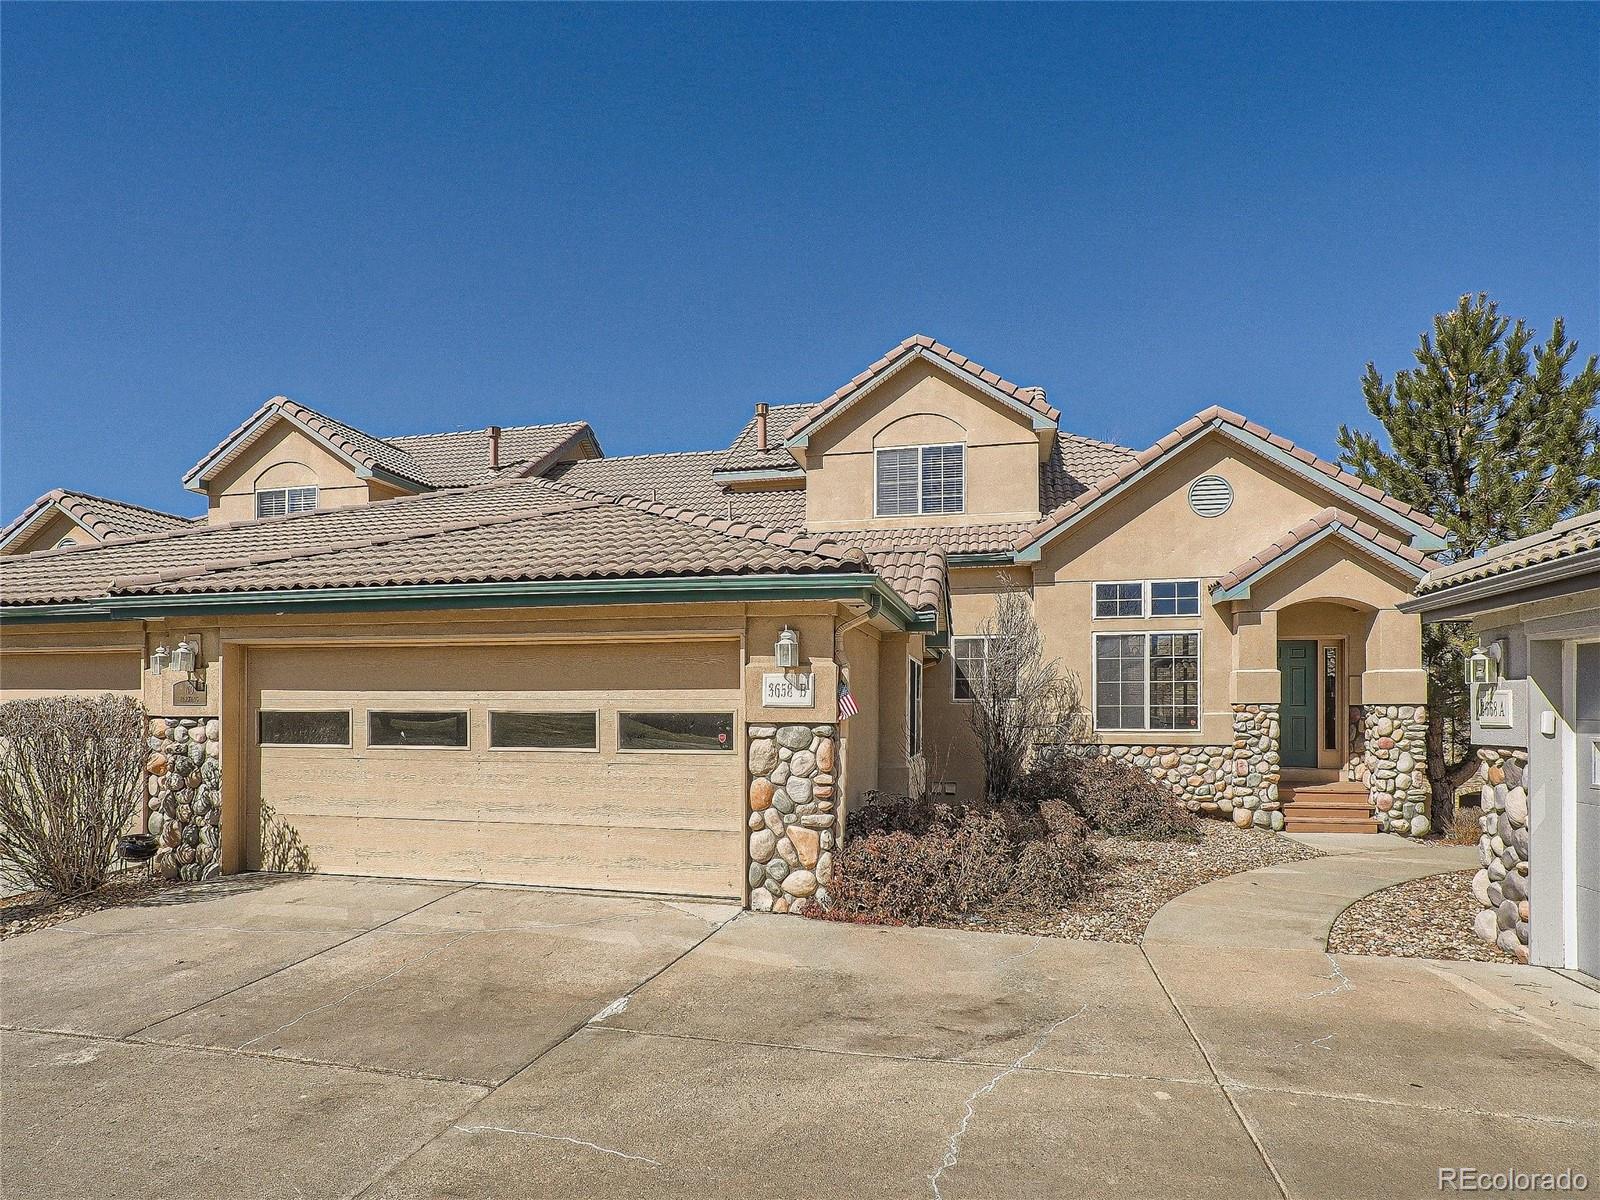 3658 W 111th Drive B, Westminster, CO 80031 - MLS#: 7393517